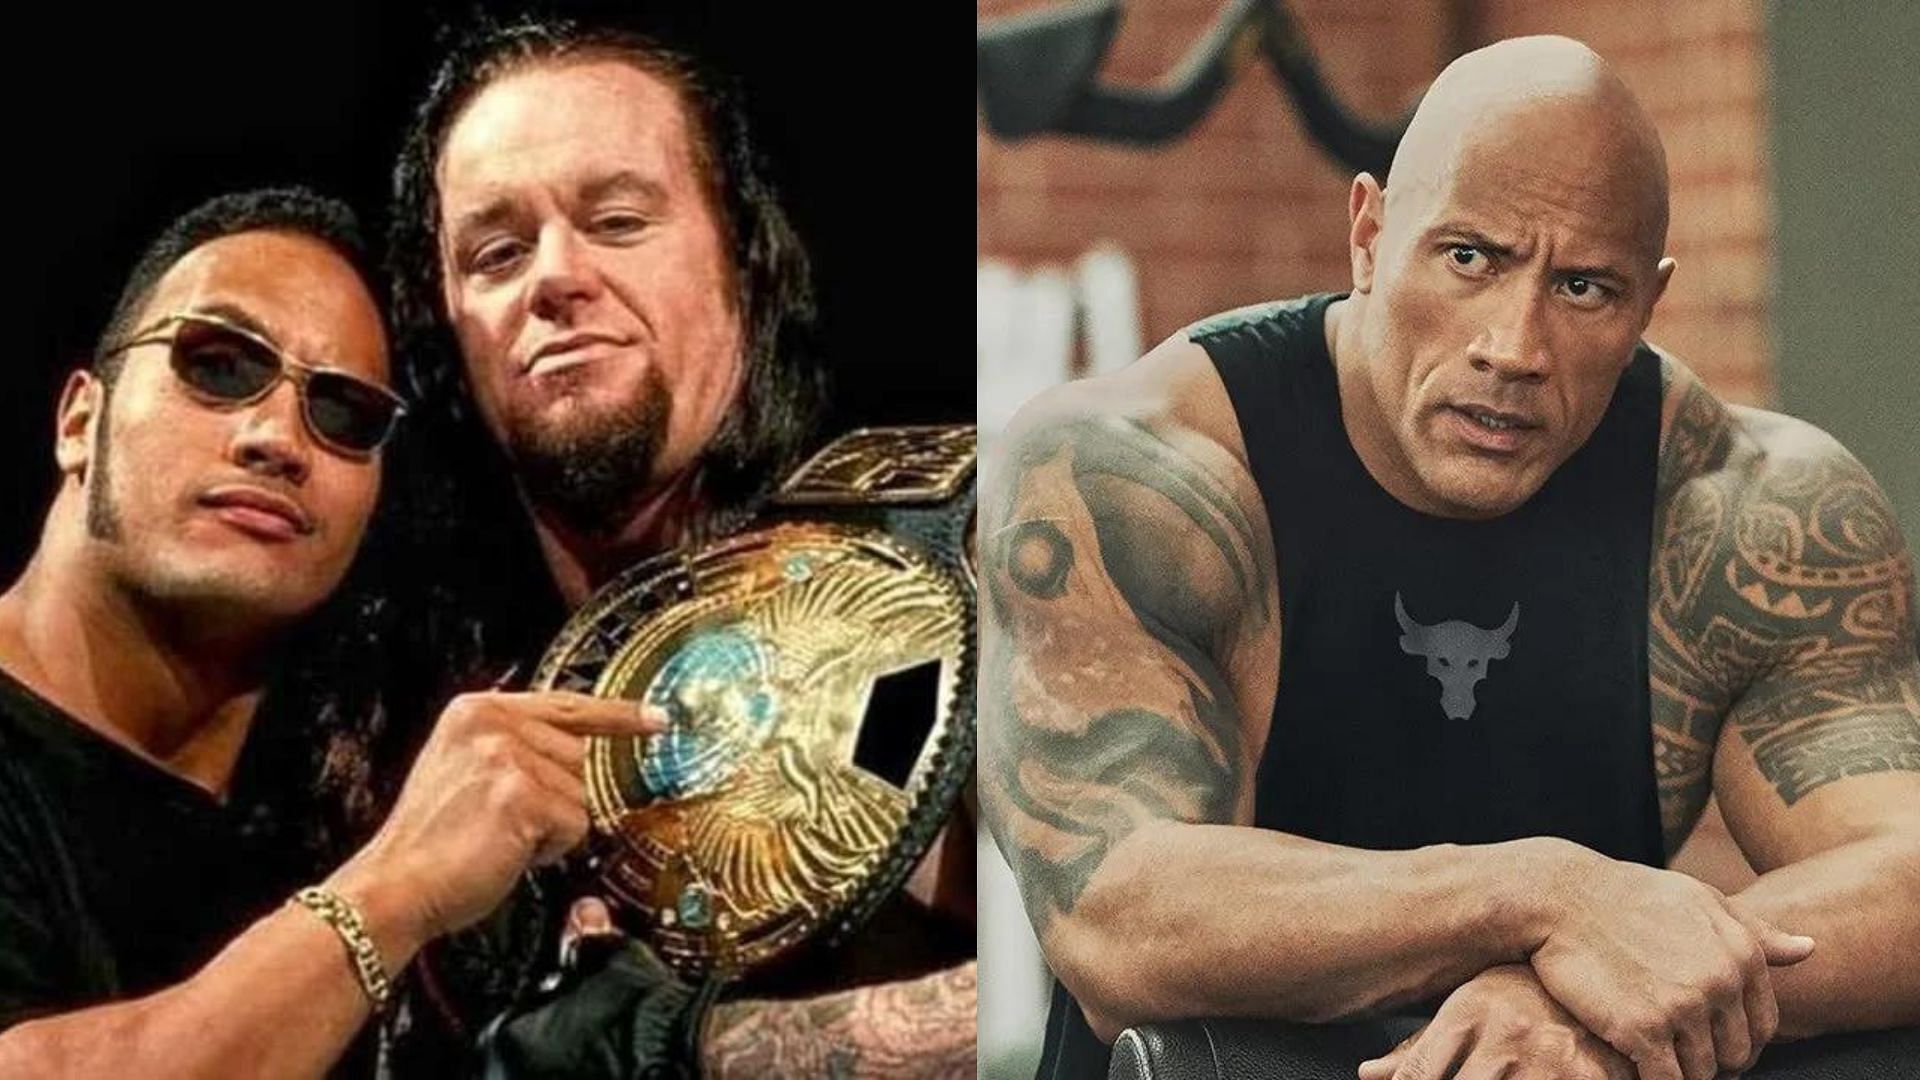 The Undertaker and The Rock worked alongside each other for numerous years